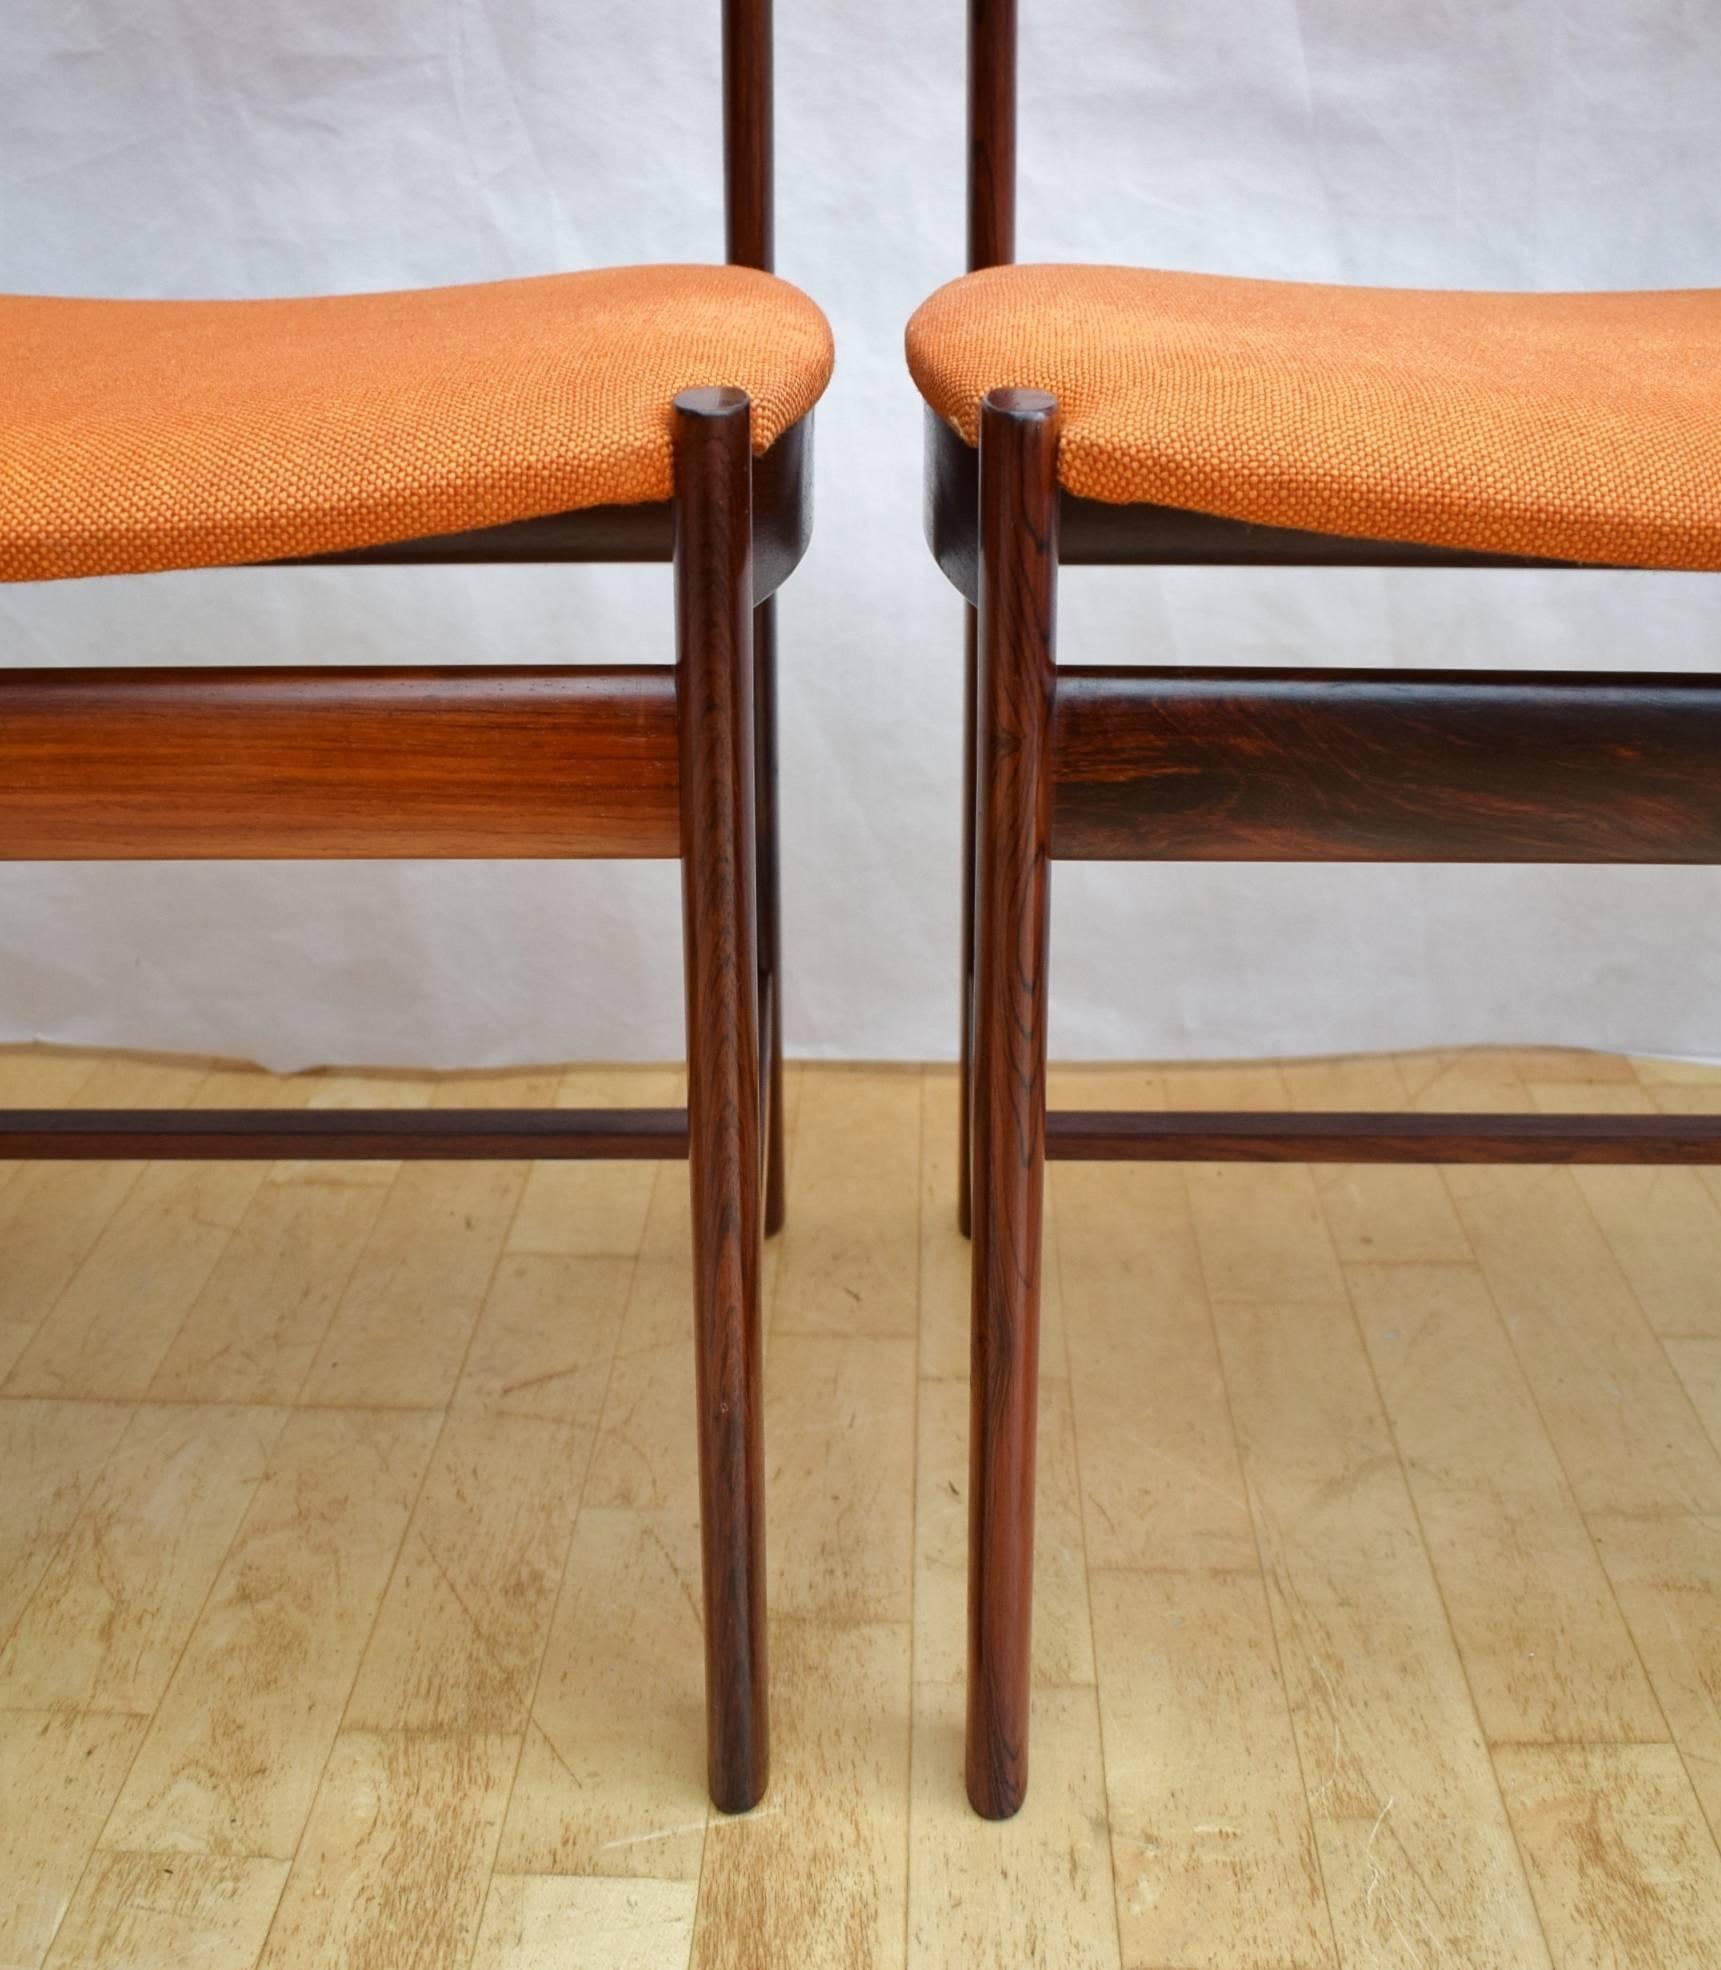 Designer: Unknown

Manufacturer: Dyrlund

Country: Denmark

Date: 1970s

Material: Solid Rio rosewood frame with original cotton upholstery

Maximum dimensions (per chair): Width 51cm, depth 48cm, height 78cm and seat height